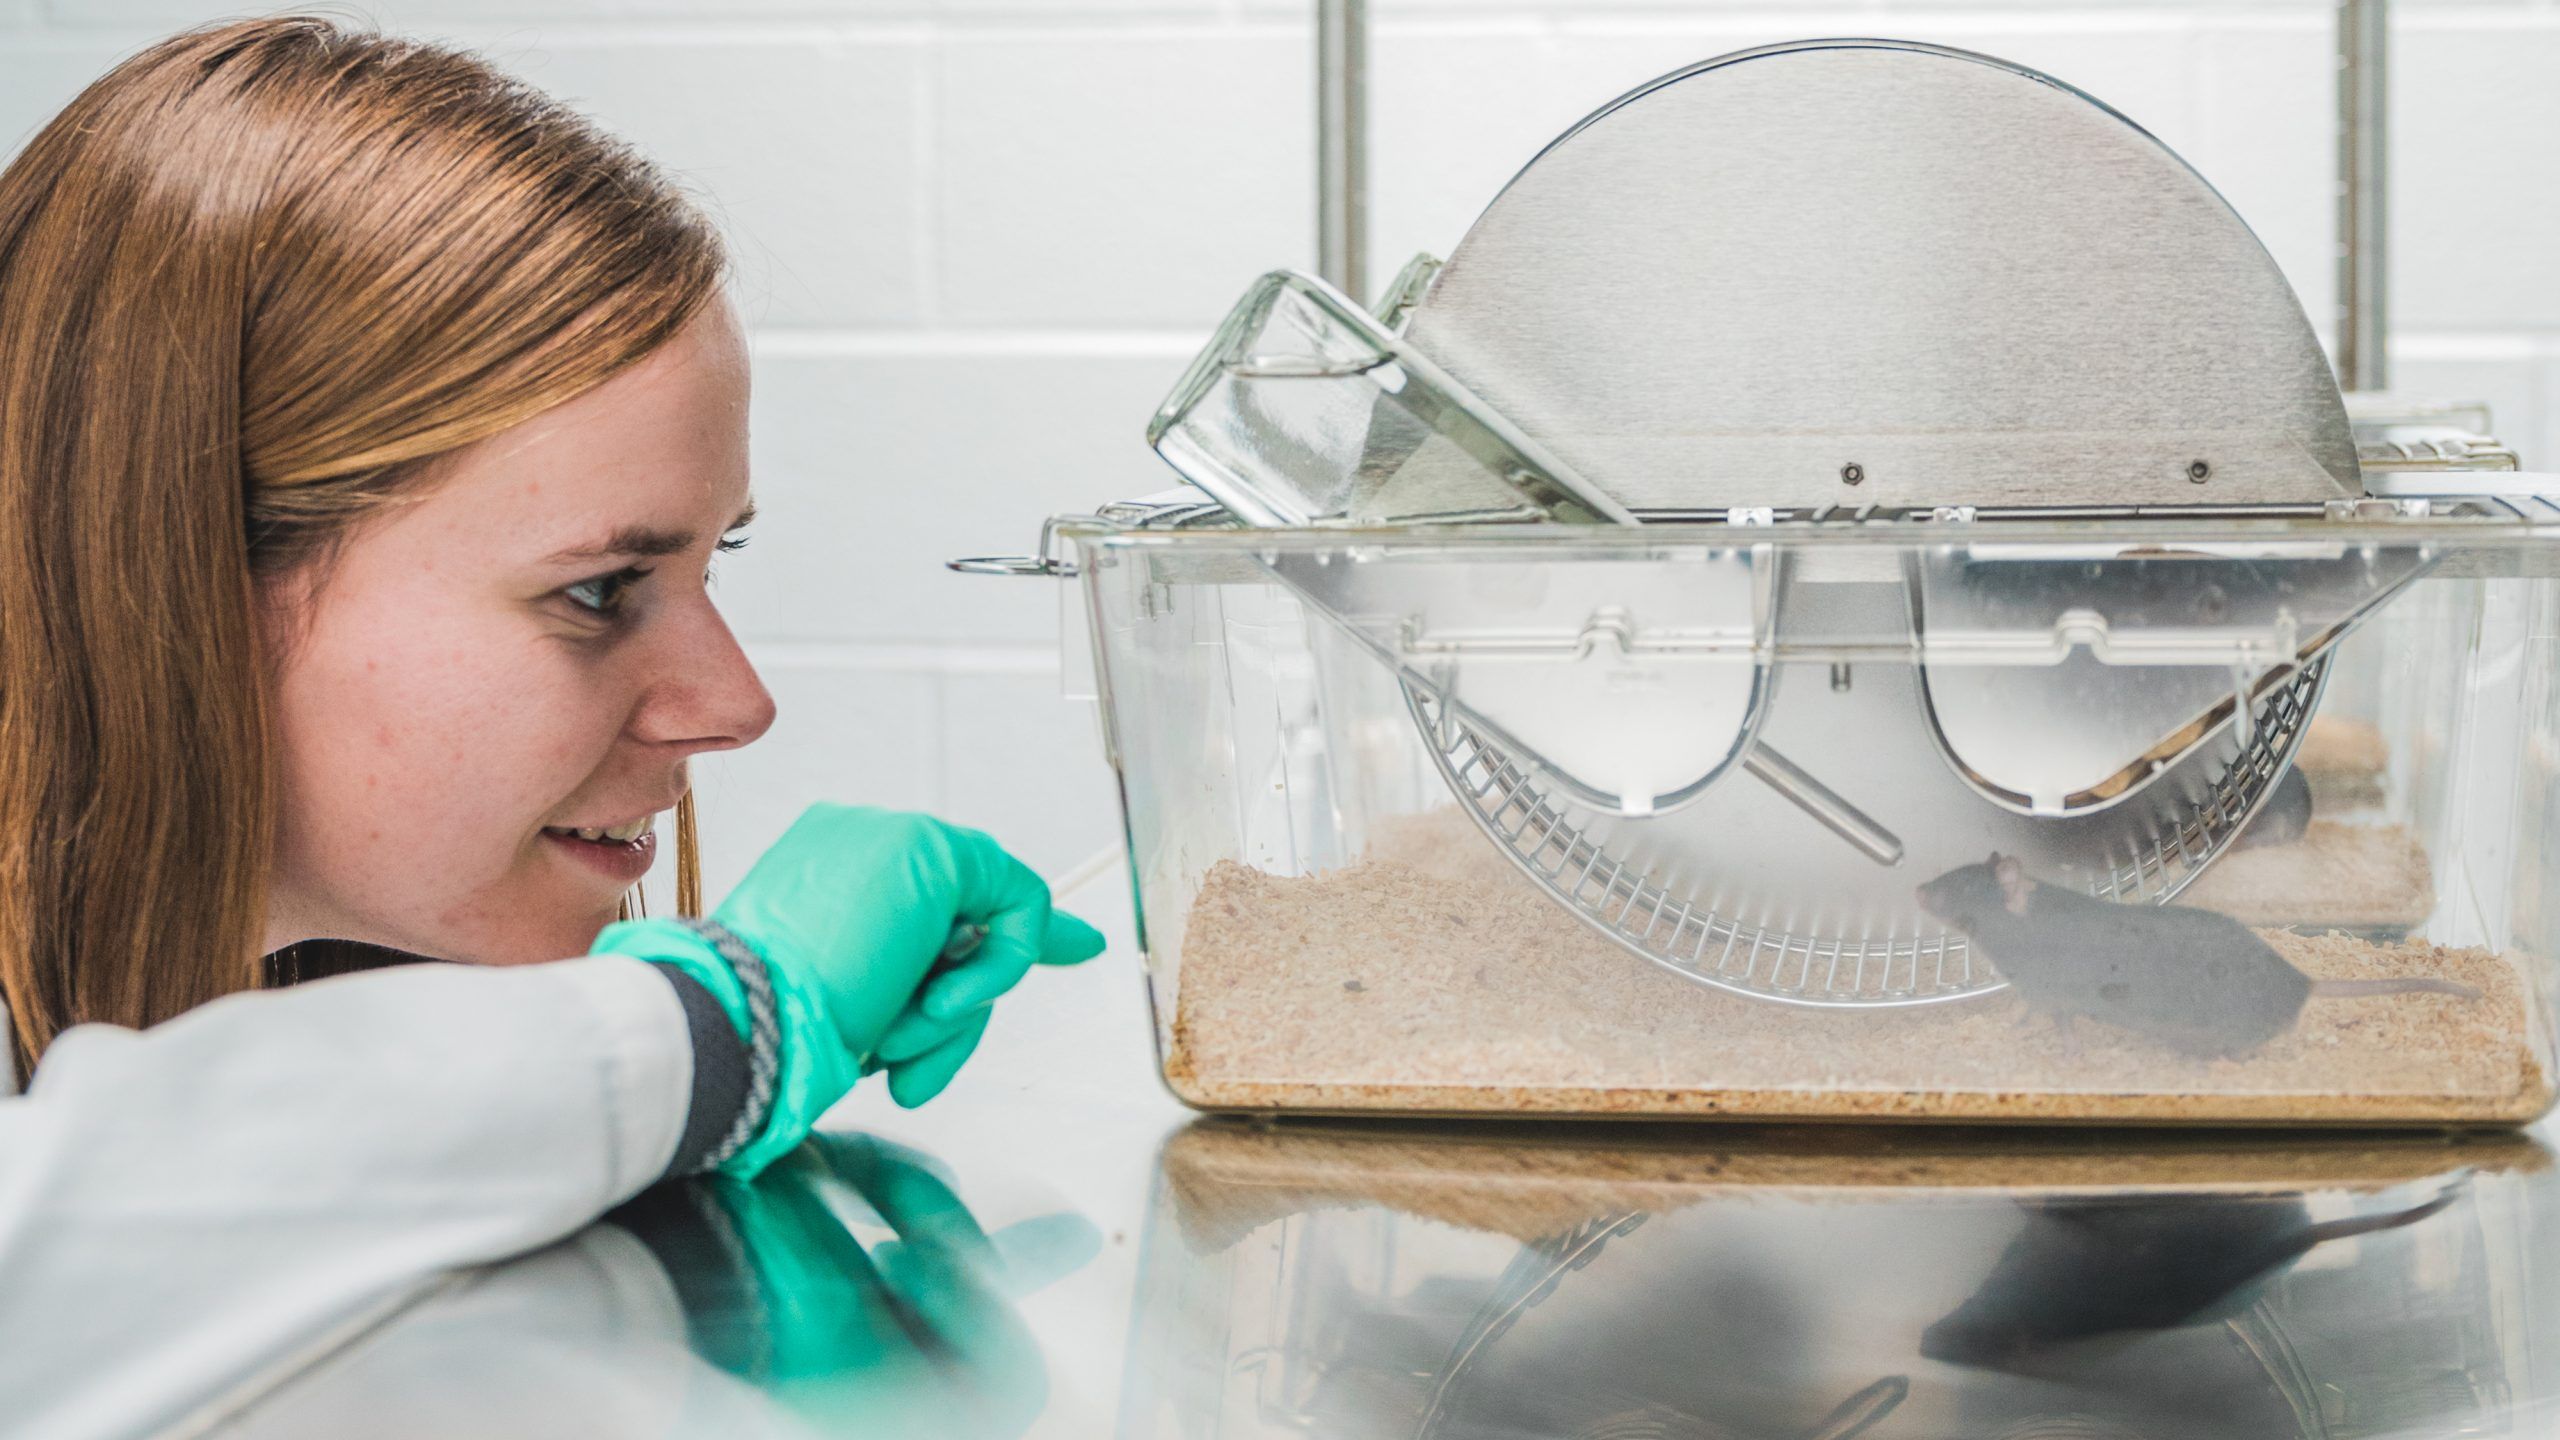 Doctoral student, Louisa Tichy, wearing a lab coat, examines a mouse in a cage.